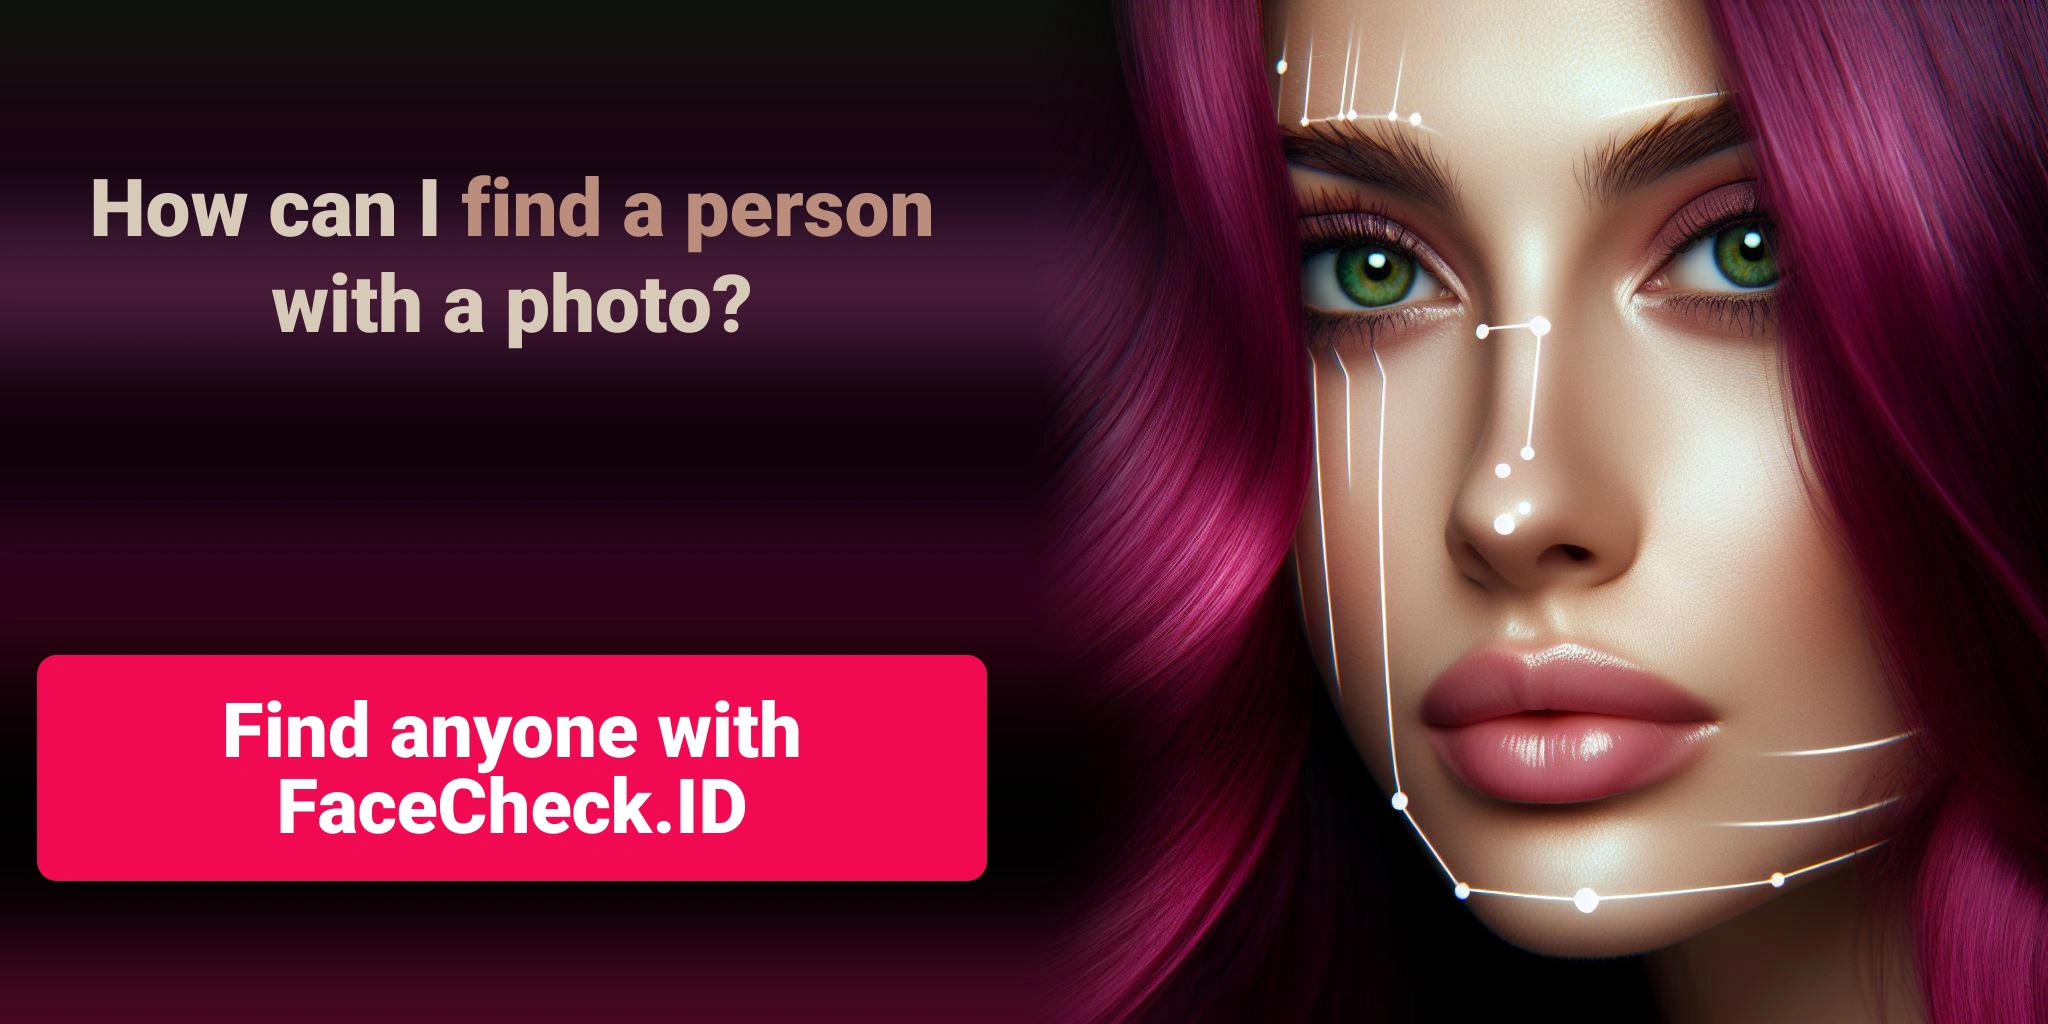 How can I find a person with a photo? Find anyone with FaceCheck.ID